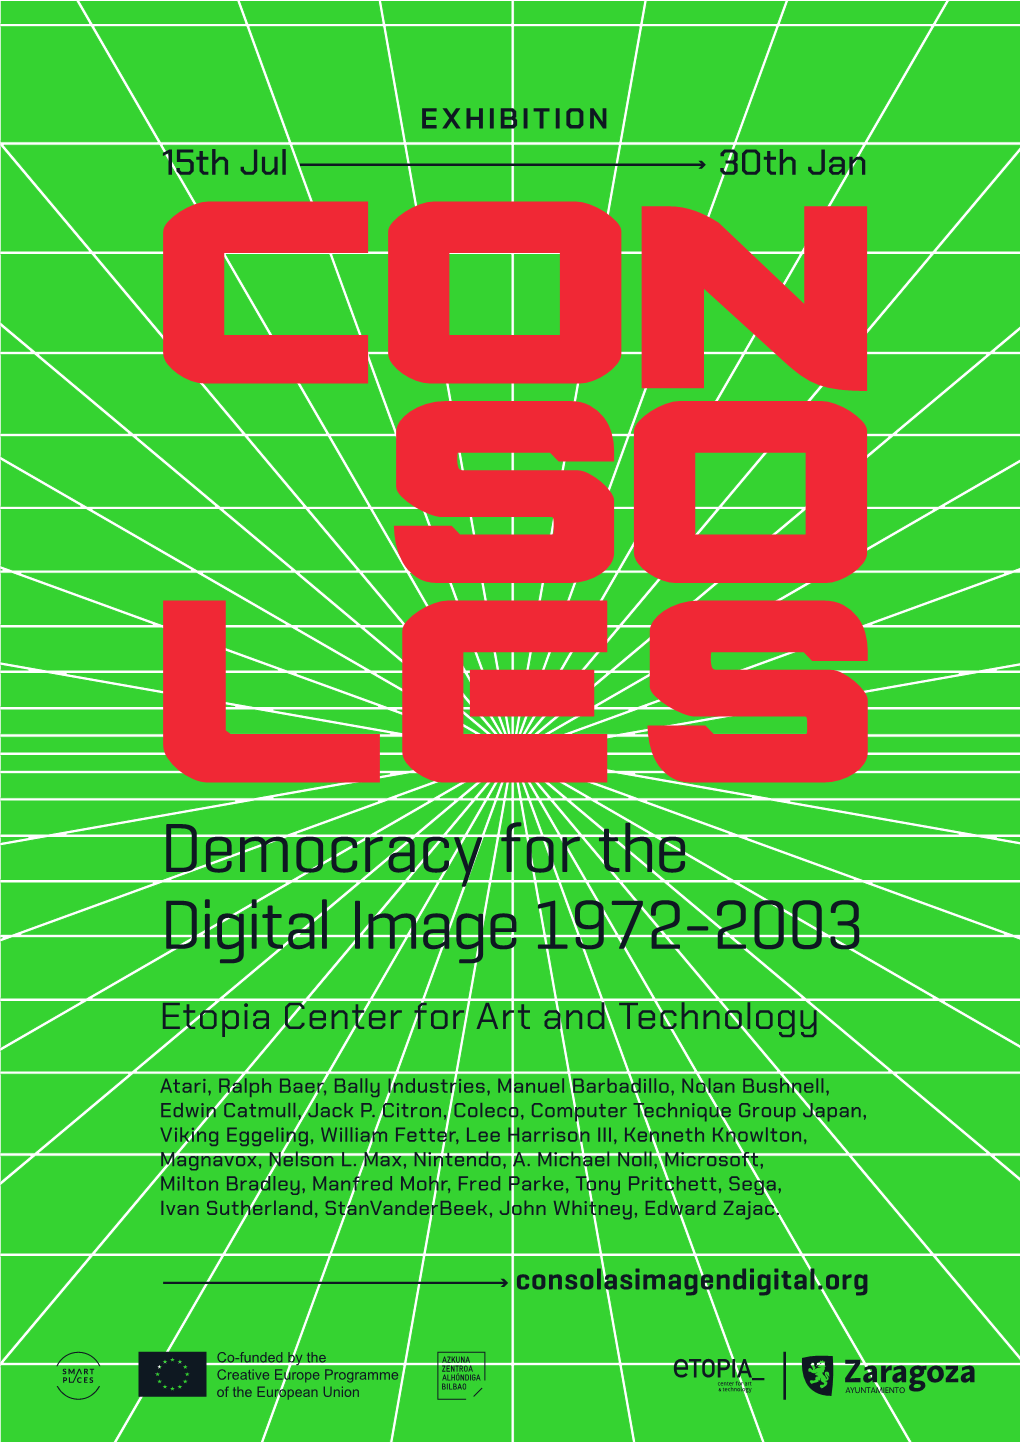 Democracy for the Digital Image 1972-2003